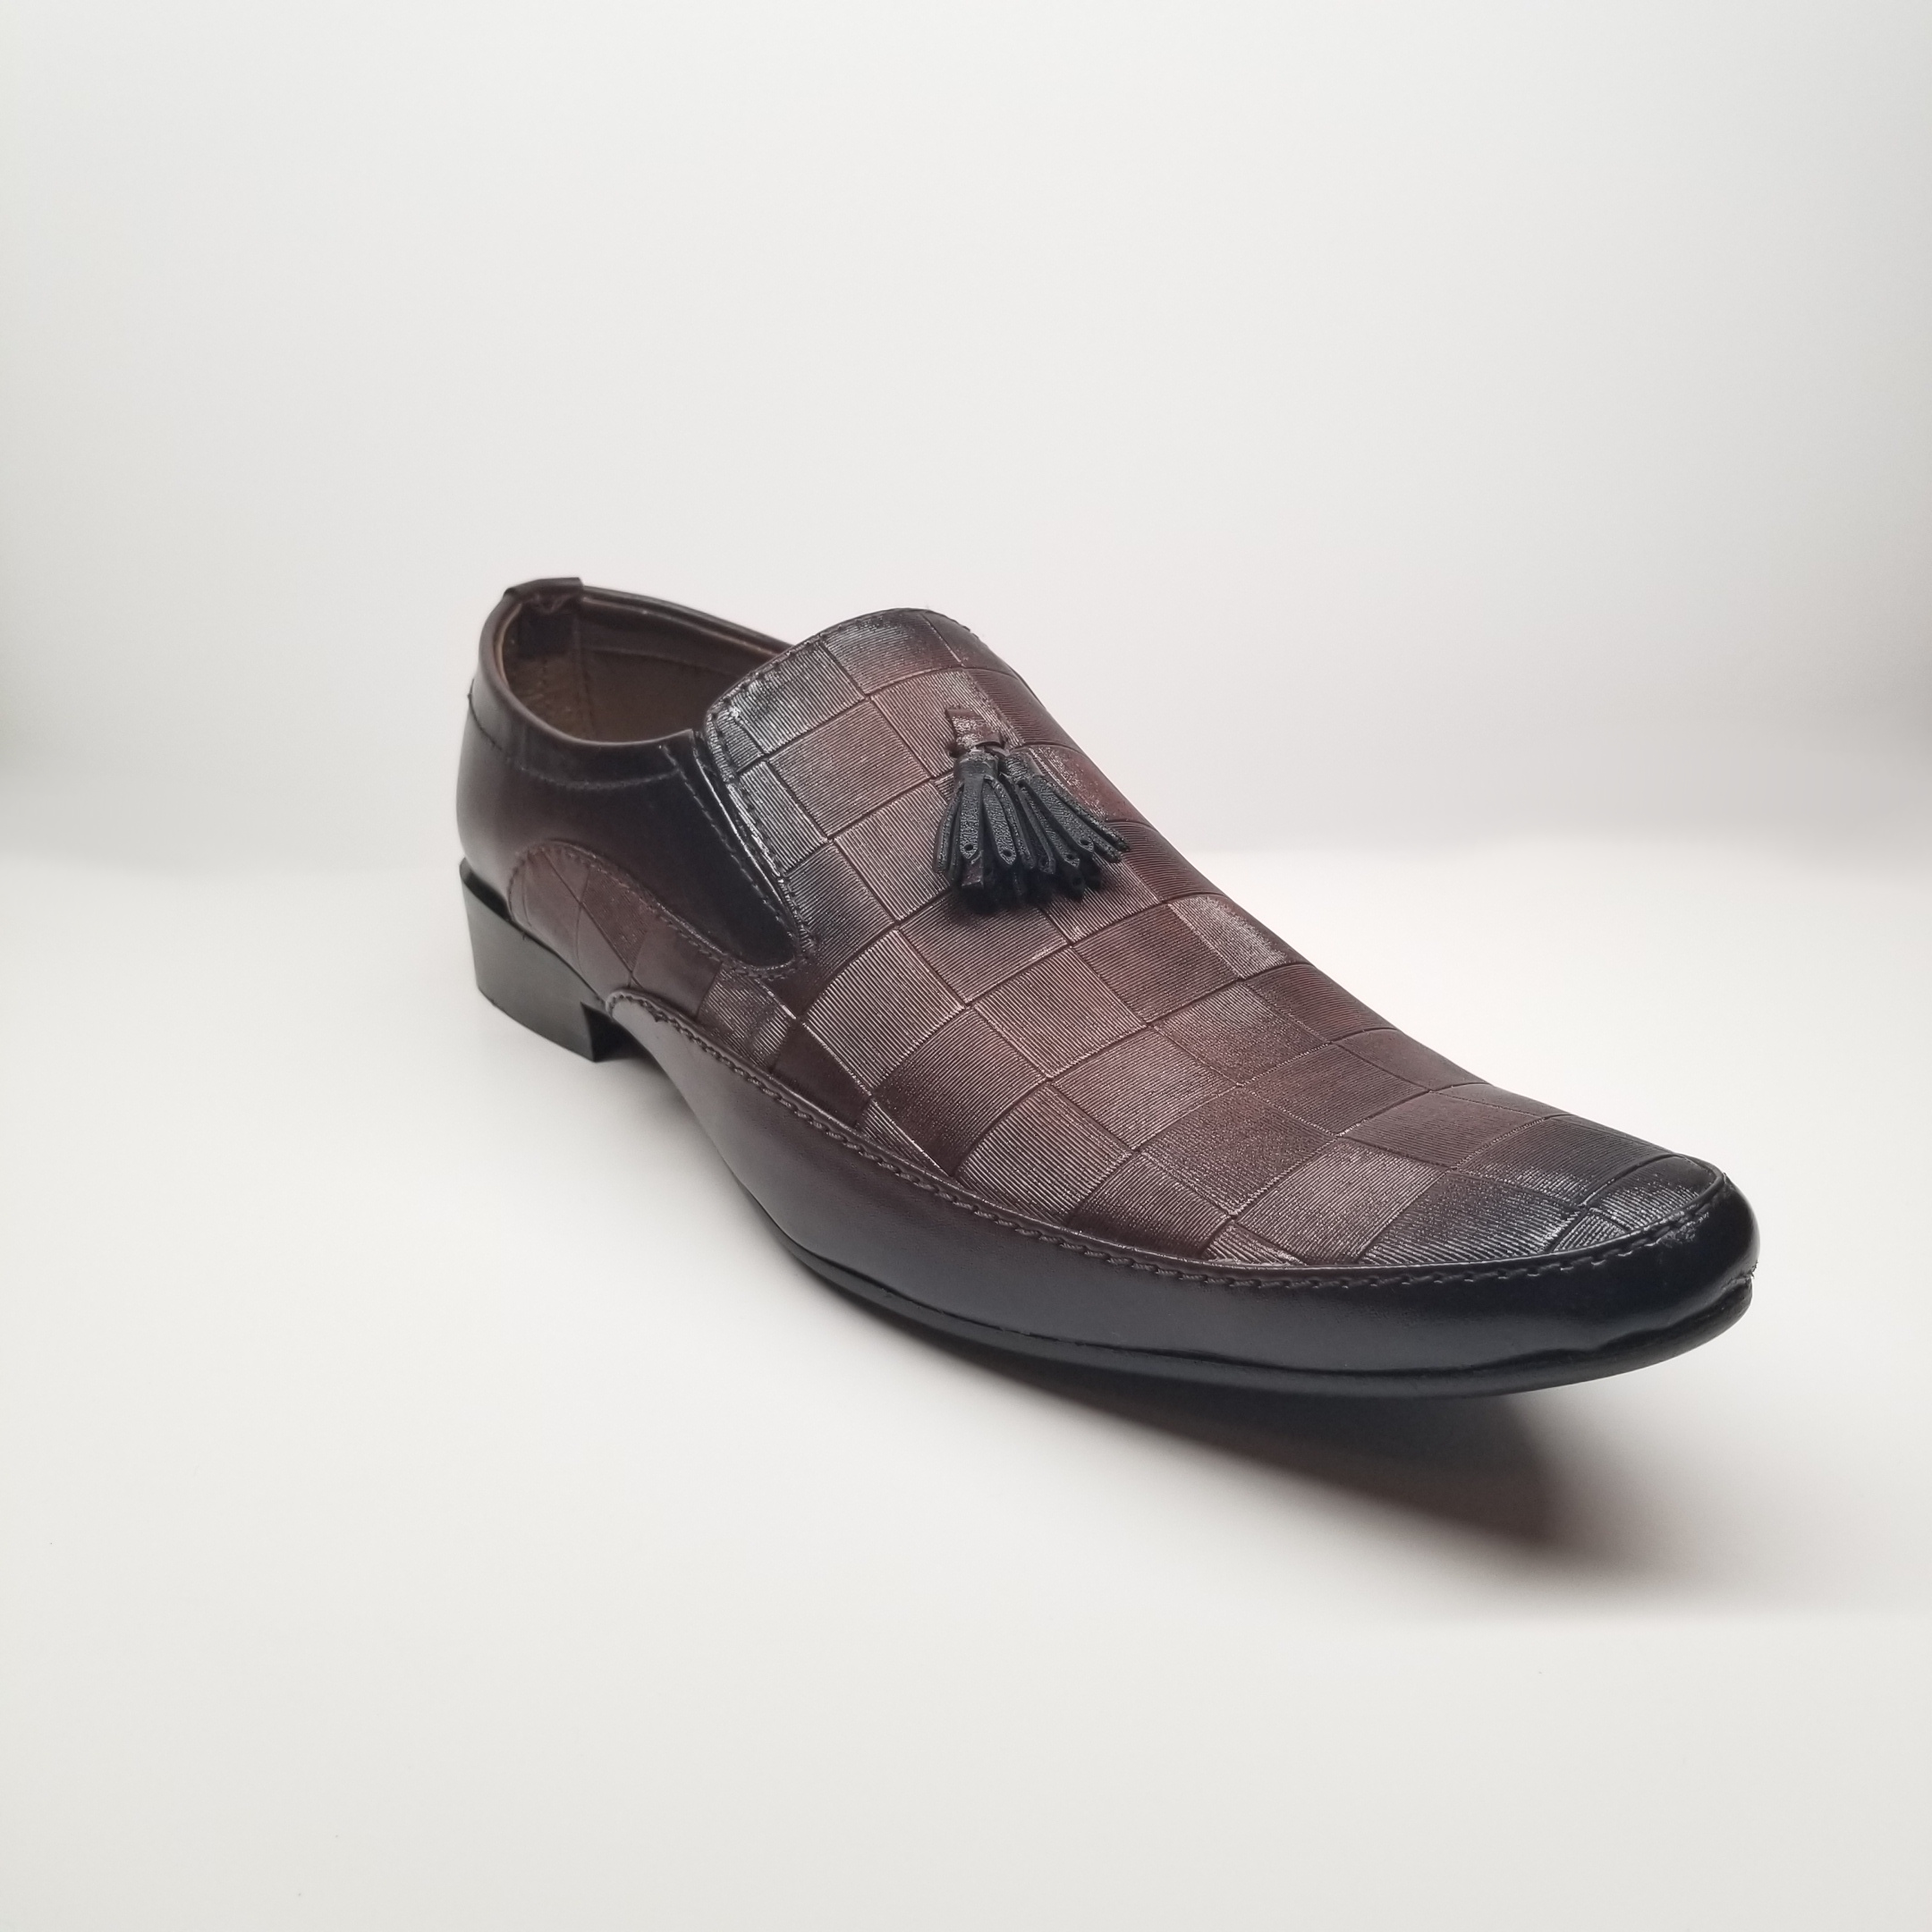 Executive dress shoes by Walkies at NMFootwear.com